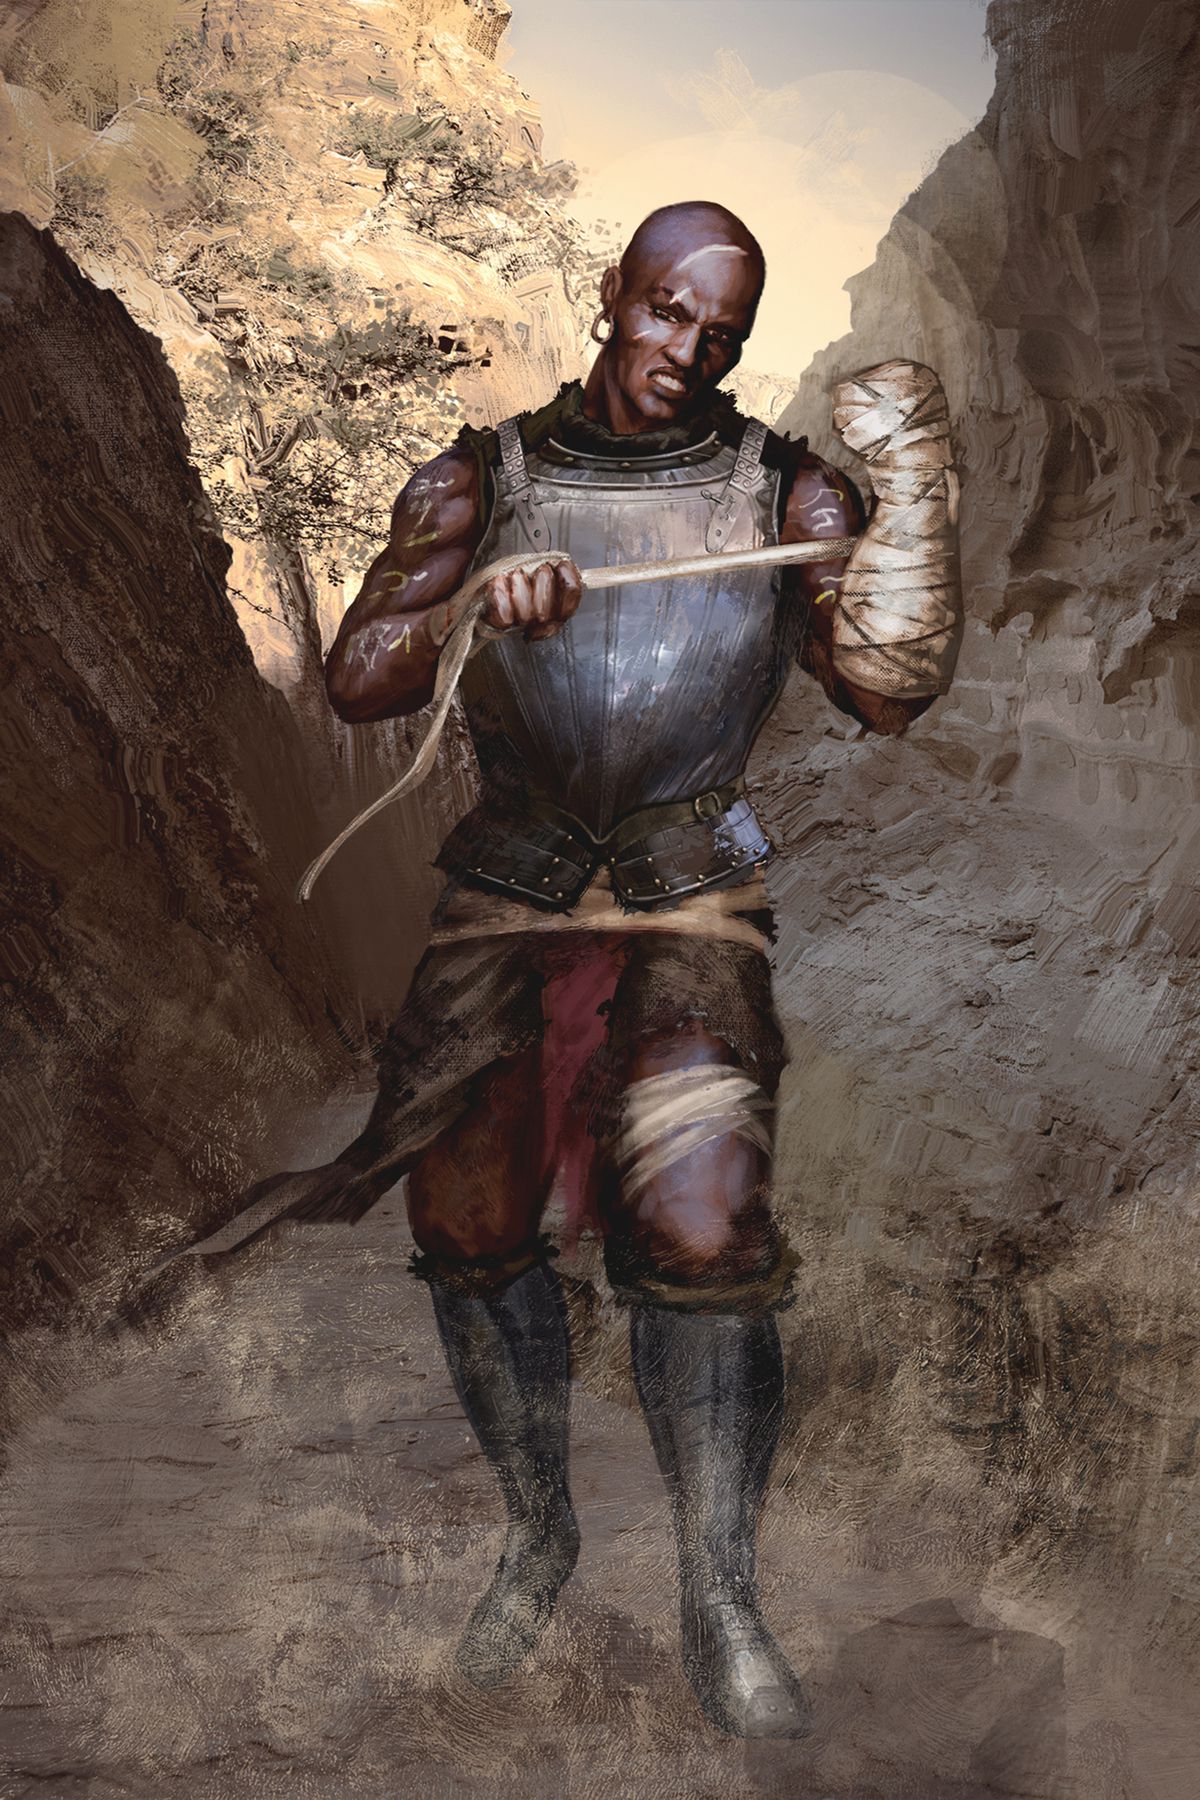 Art for an Adept Skirmisher shows a Black man in a steel breastplate wrapping his left hand in a bandage.